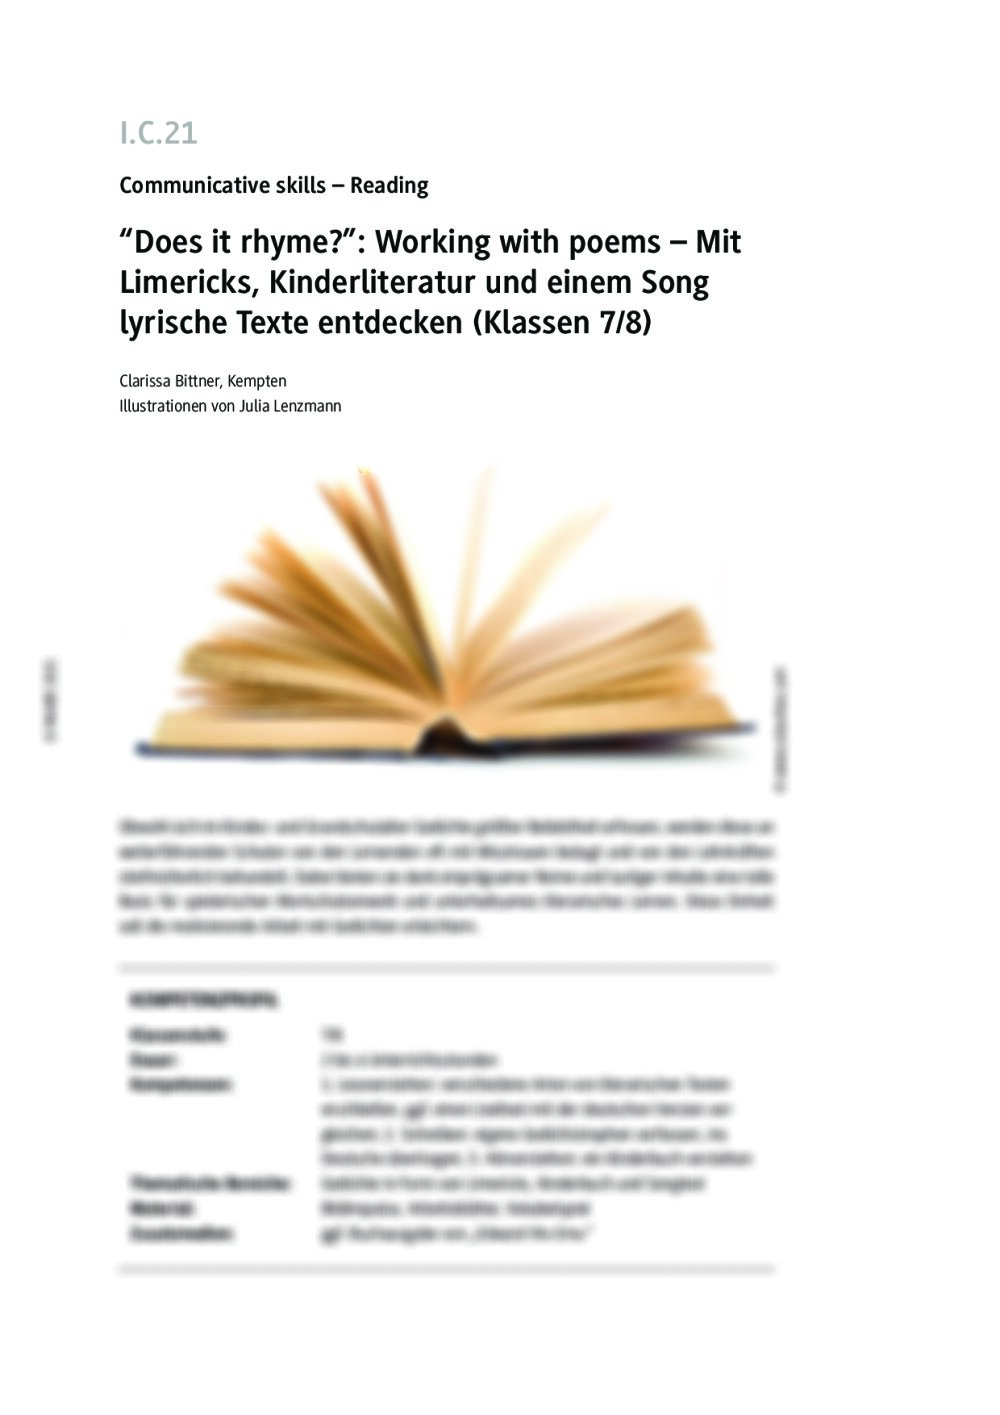 "Does it rhyme?": Working with poems - Seite 1